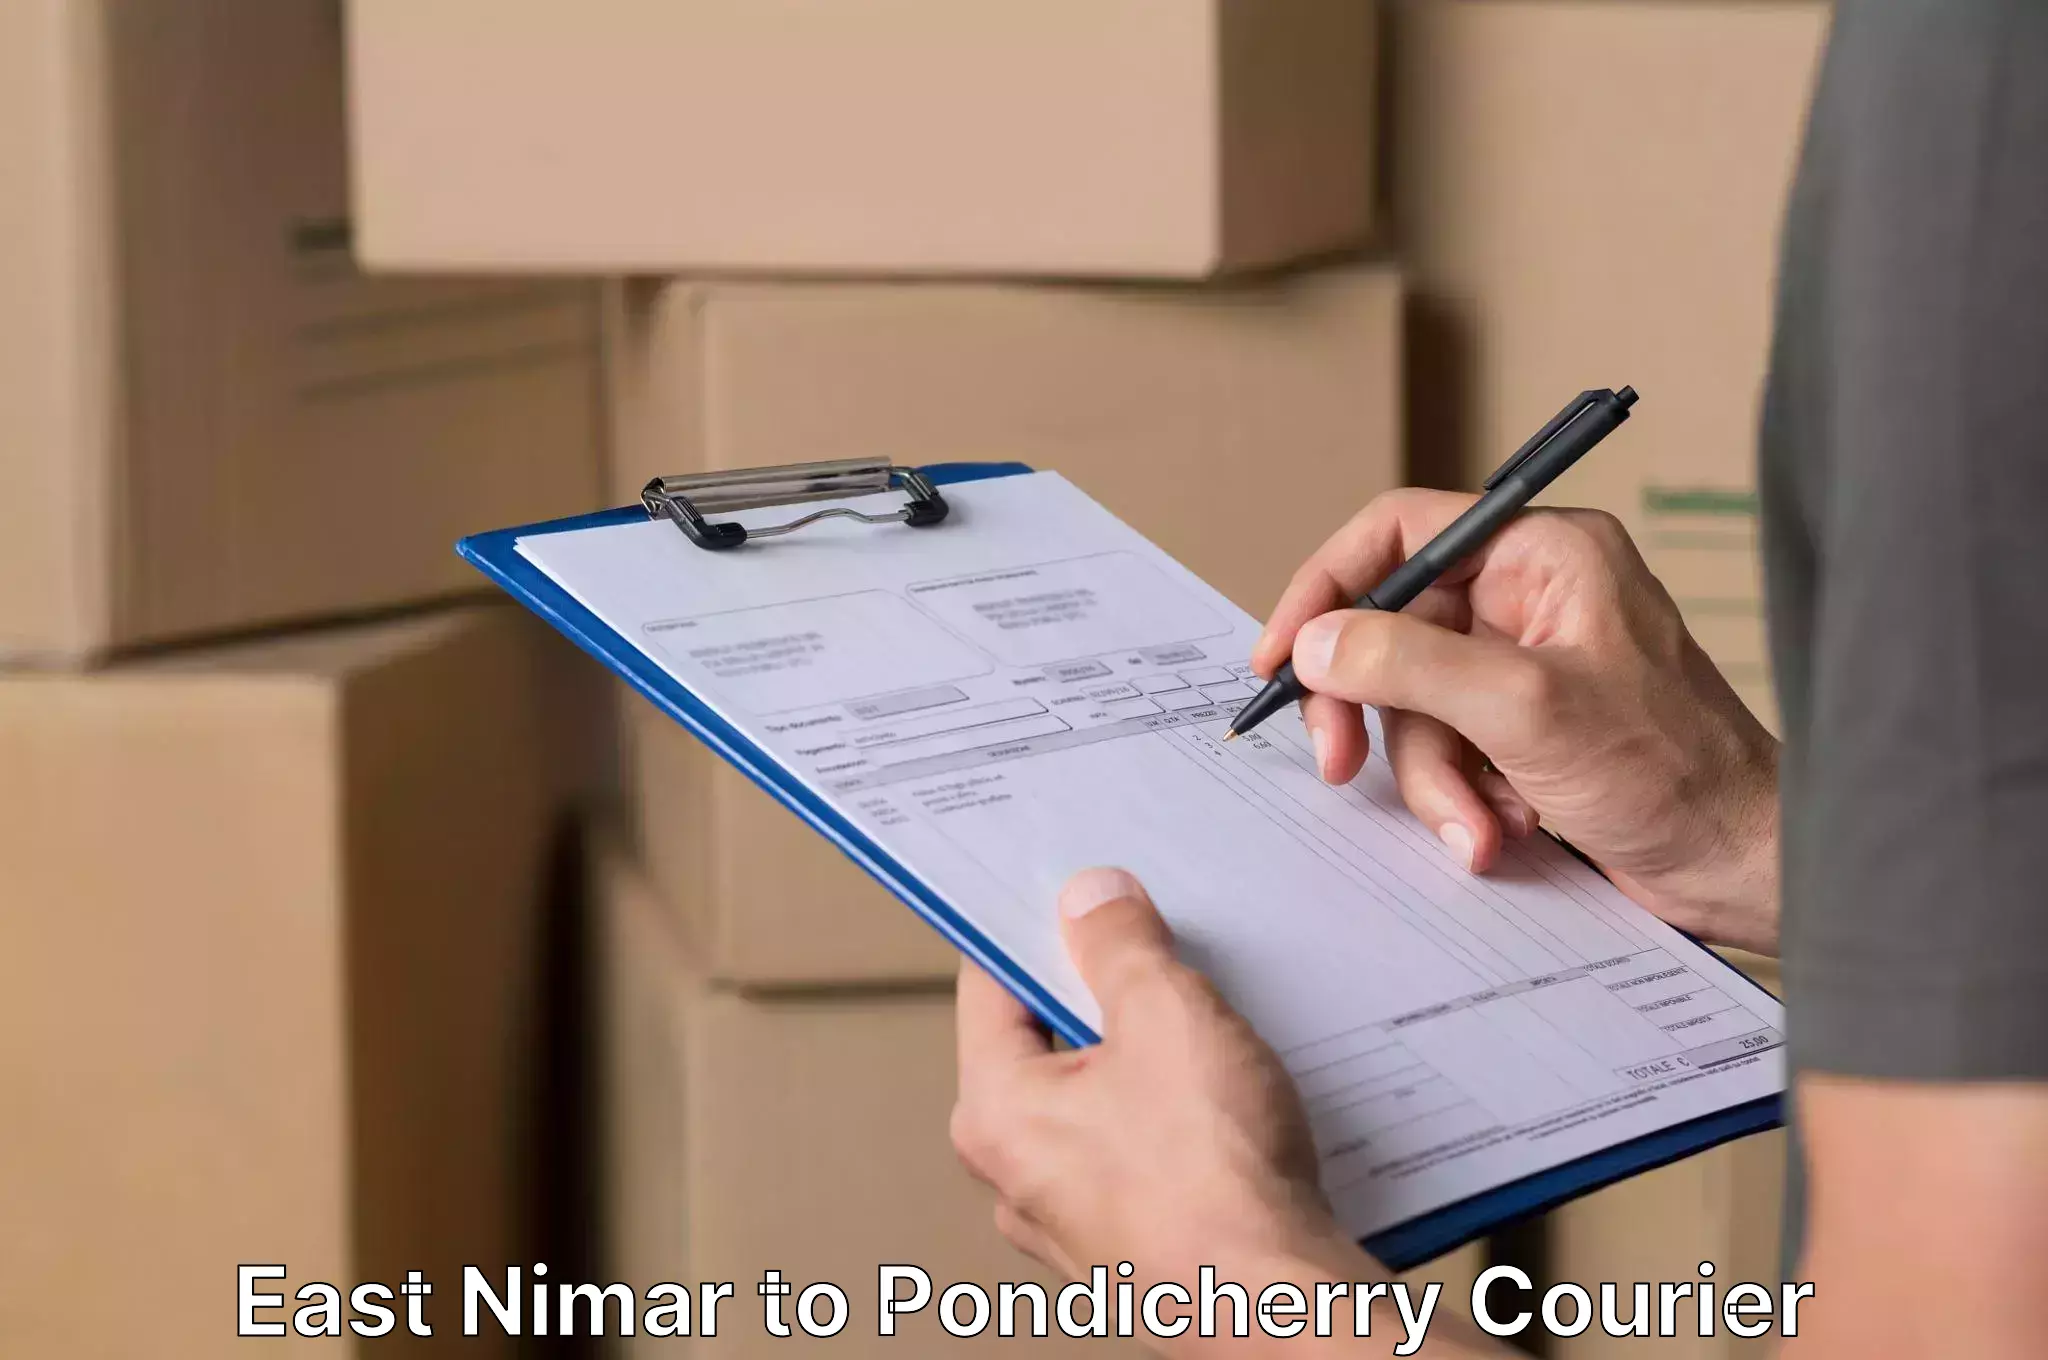 Professional relocation services in East Nimar to Pondicherry